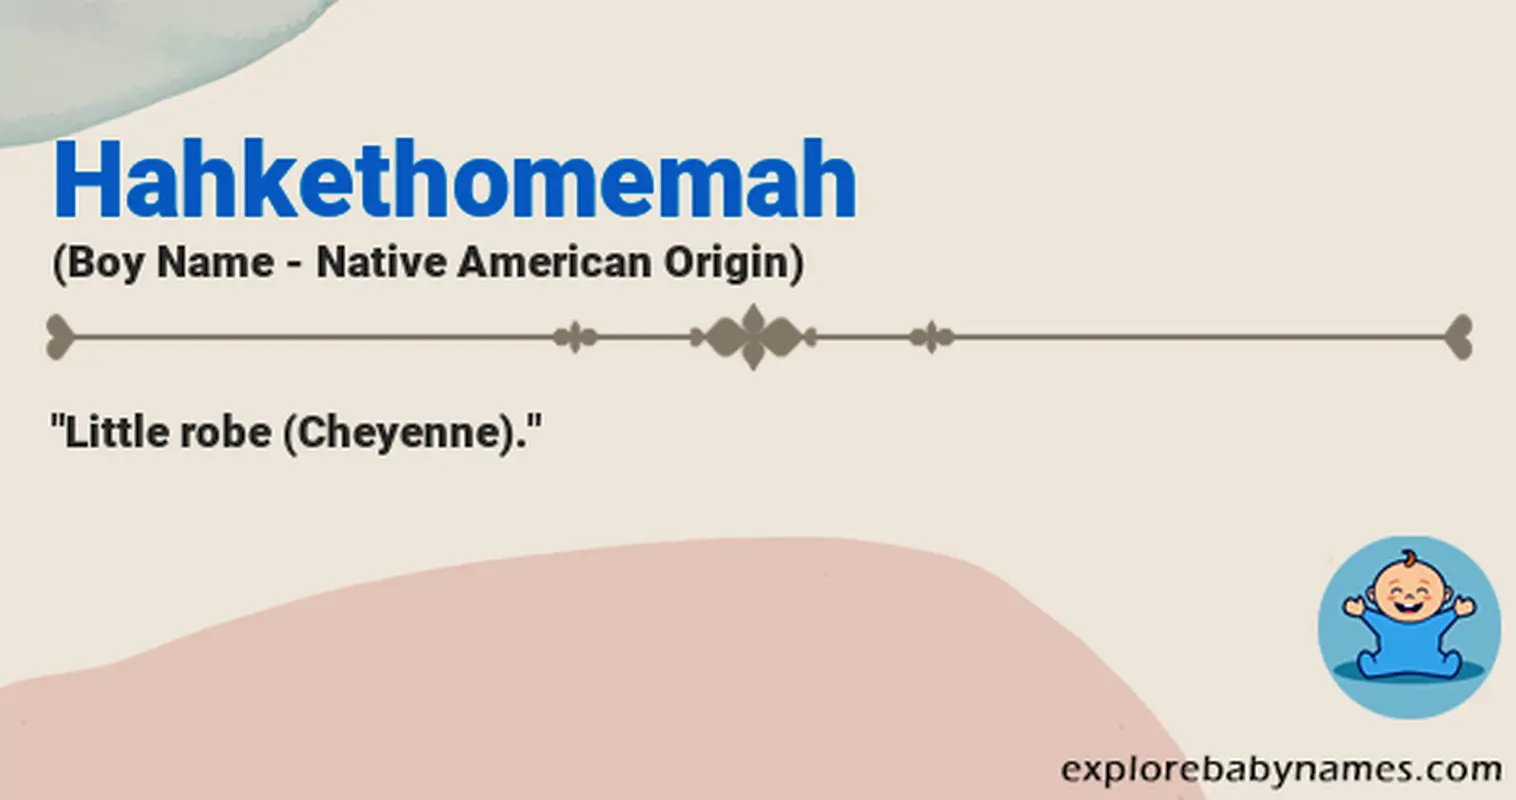 Meaning of Hahkethomemah